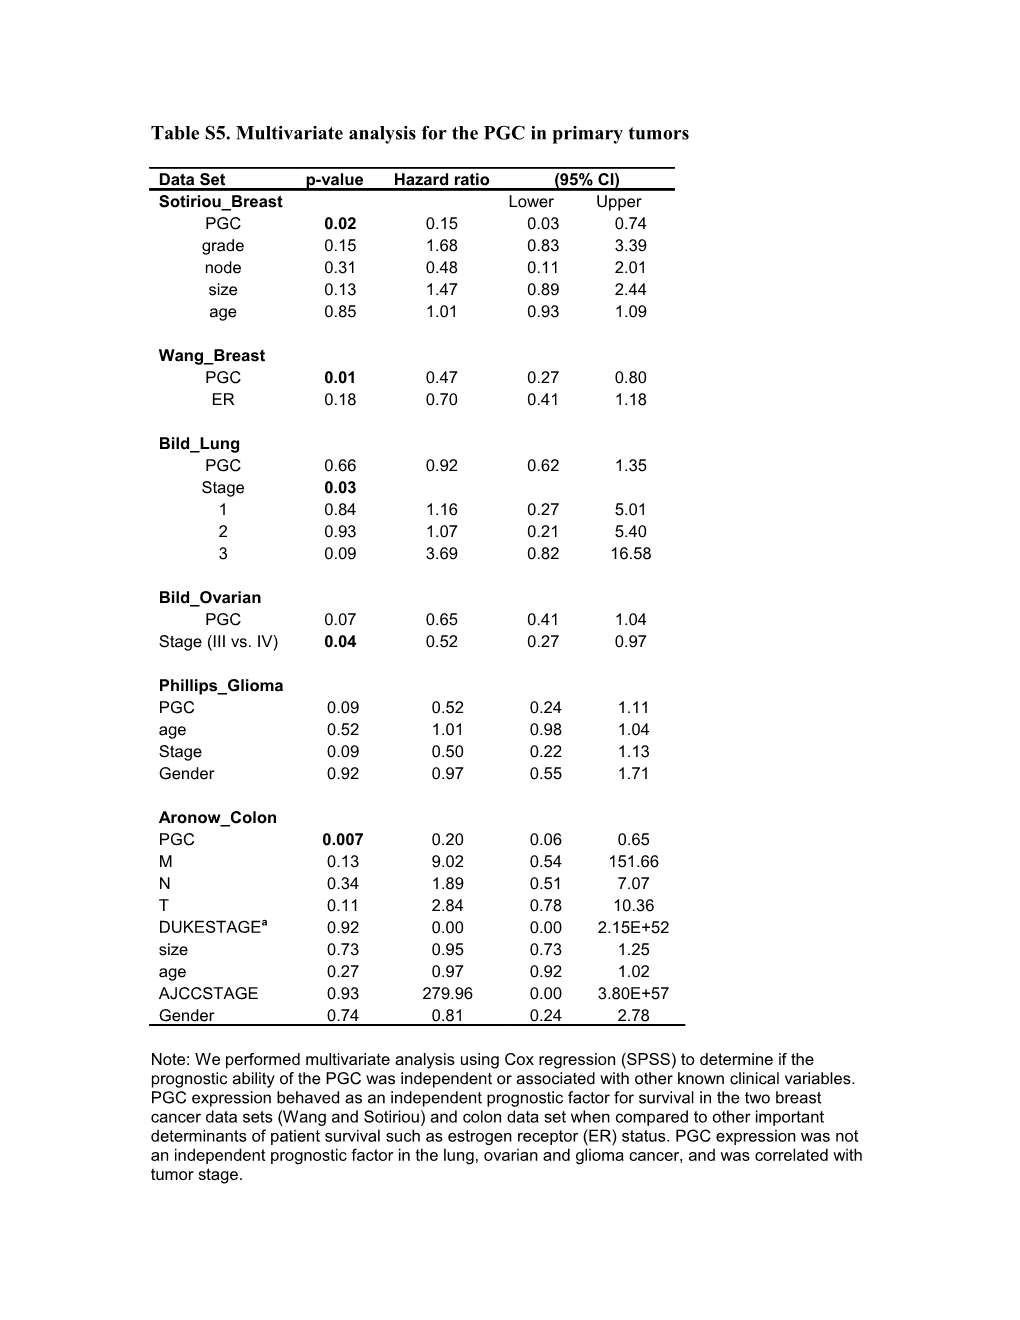 Table S5. Multivariate Analysis for the PGC in Primary Tumors